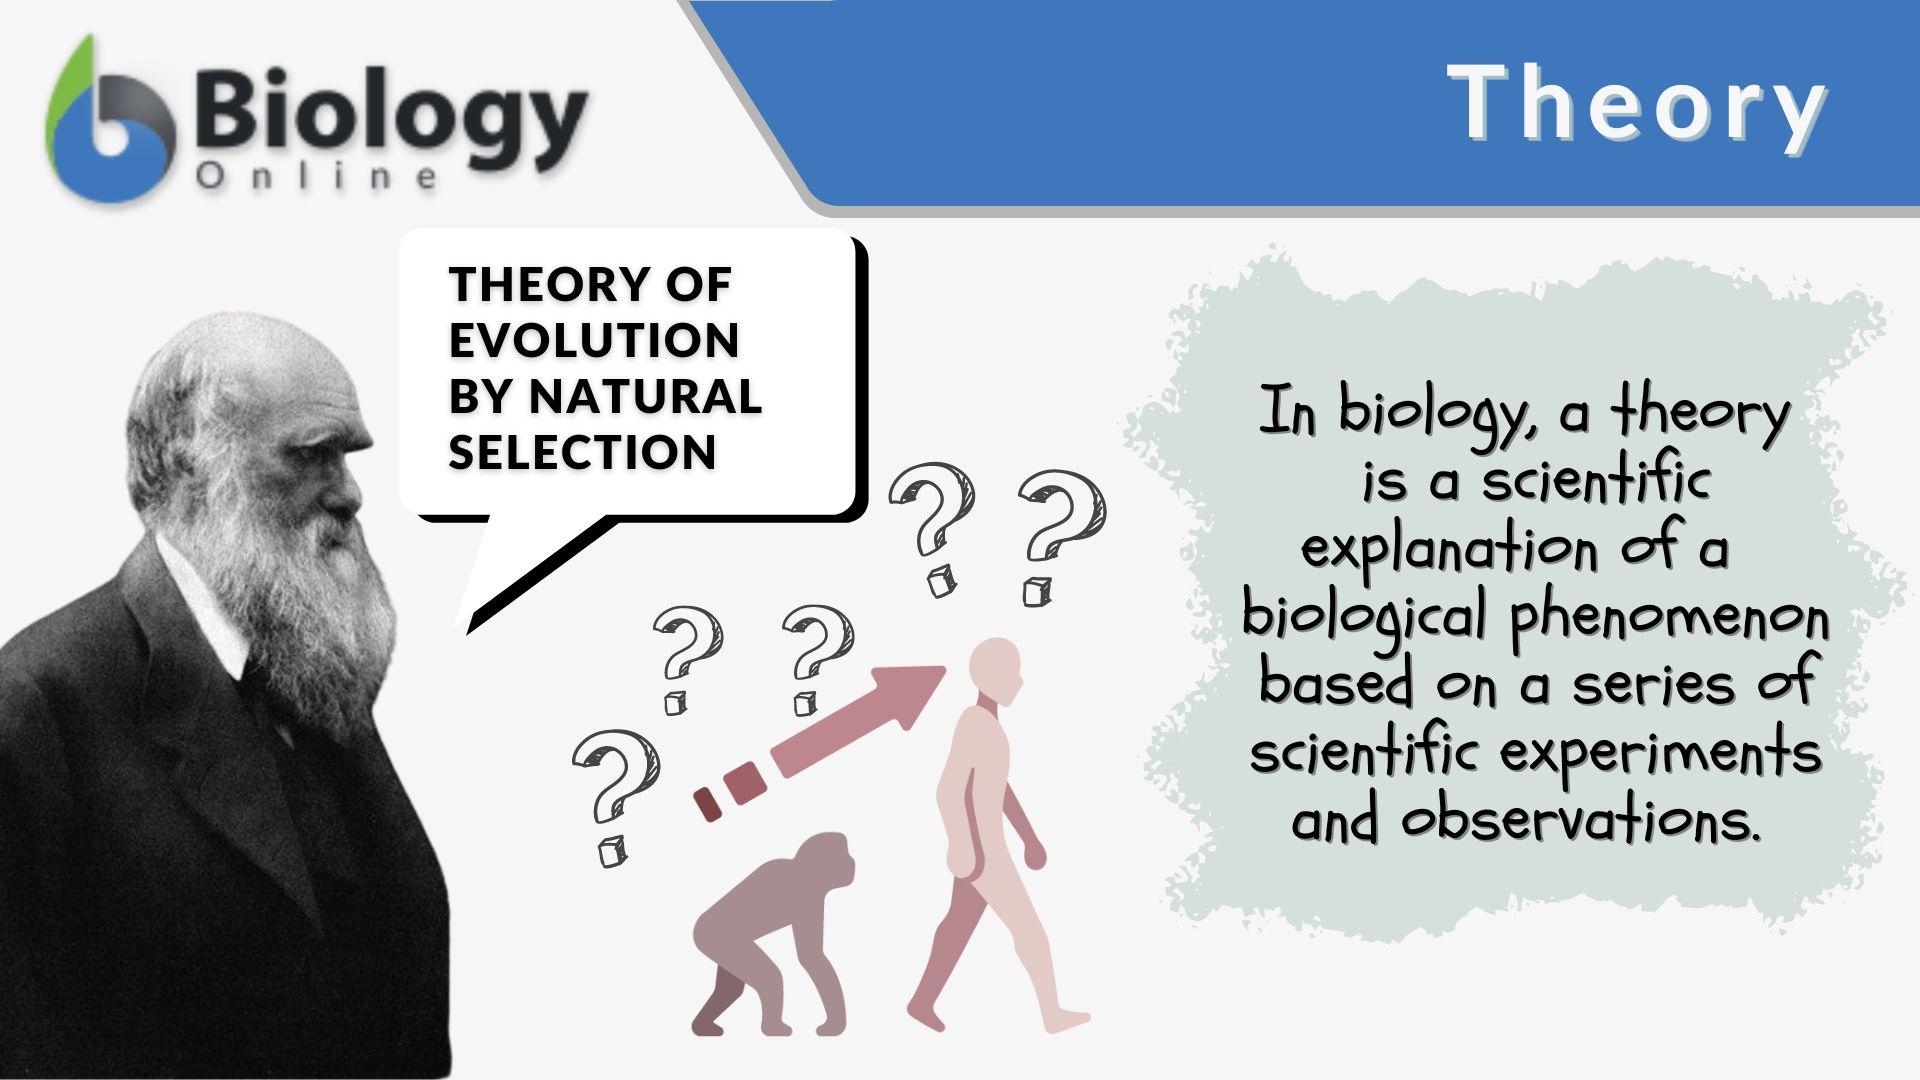 Theory Definition and Examples - Biology Online Dictionary